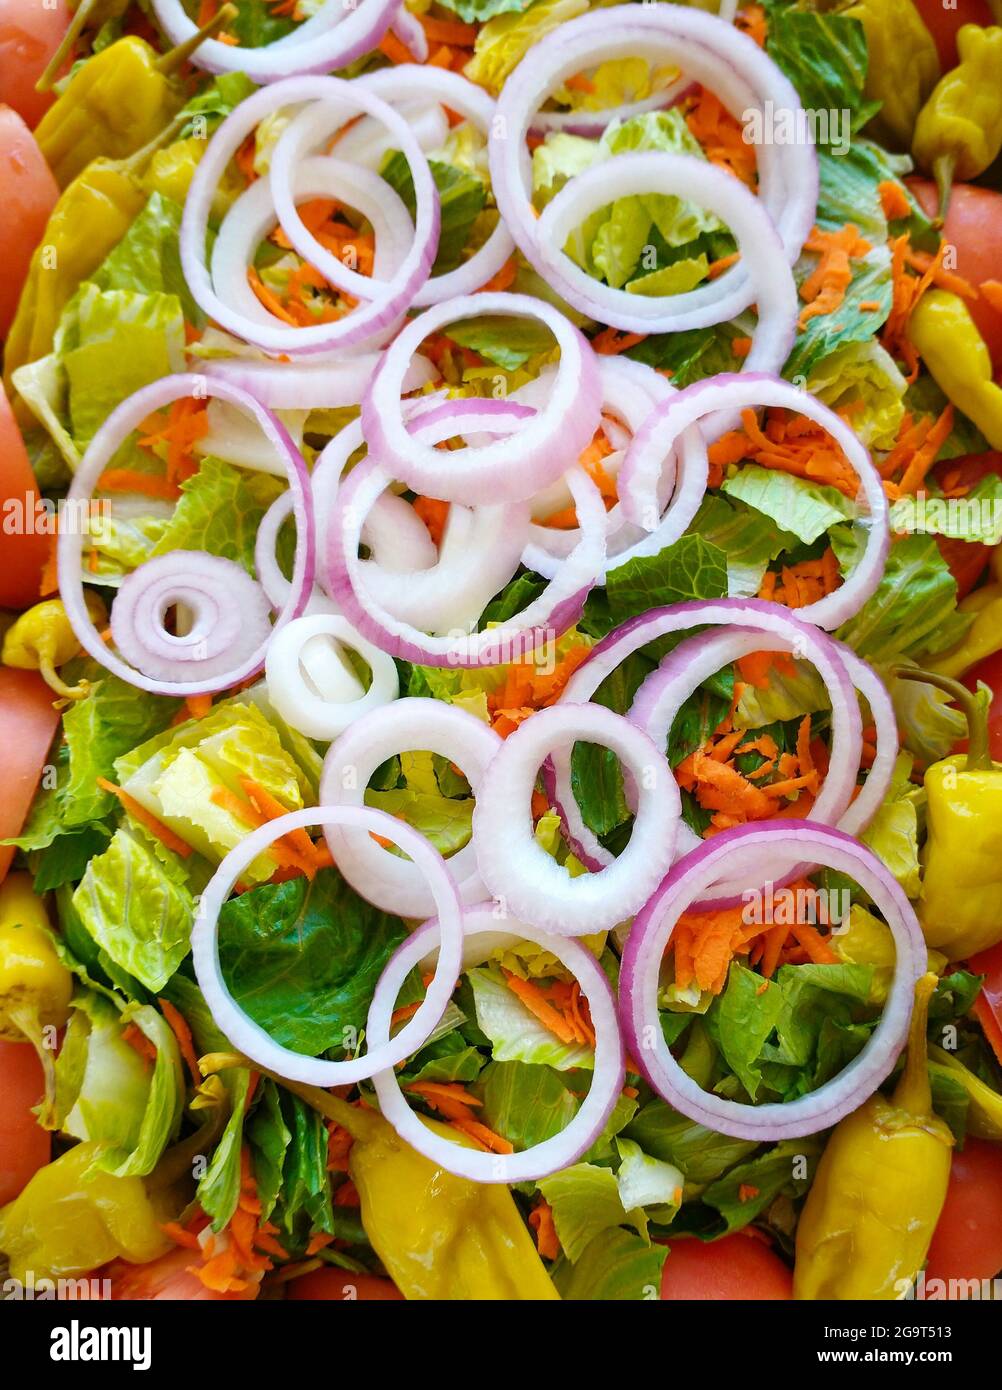 Mixed Sald with Onions Stock Photo